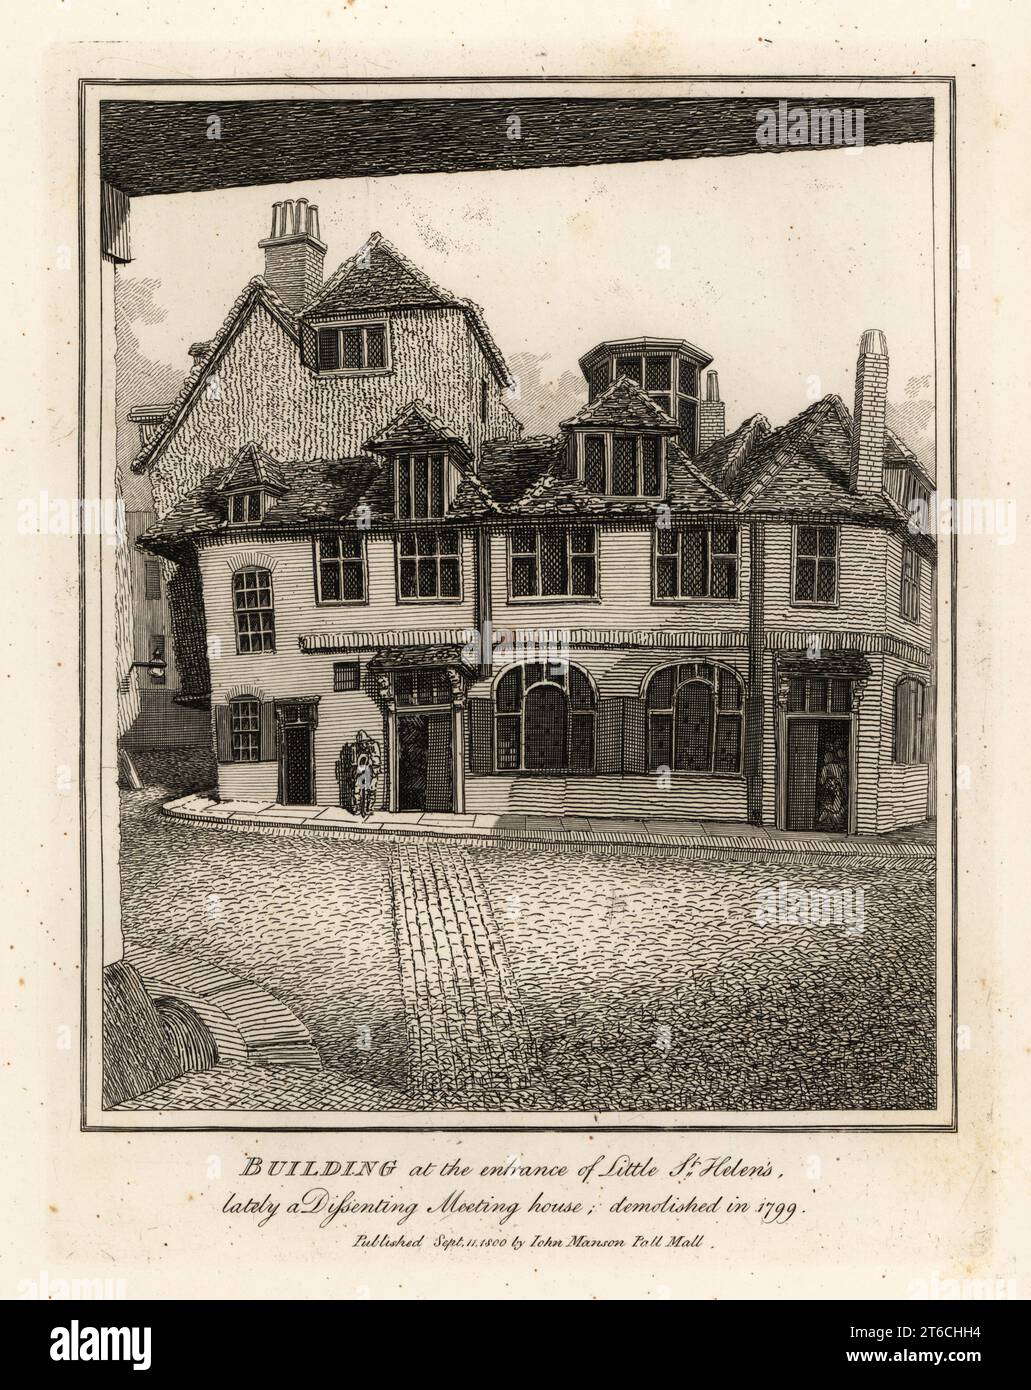 Building at the entrance of Little St. Helens, lately a Dissenting Meeting House, demolished in 1799. Old timber frame Tudor house on cobbled street. Copperplate engraving by John Thomas Smith after original drawings by members of the Society of Antiquaries from his J.T. Smiths Antiquities of London and its Environs, J. Sewell, R. Folder, J. Simco, London, 1791. Stock Photo